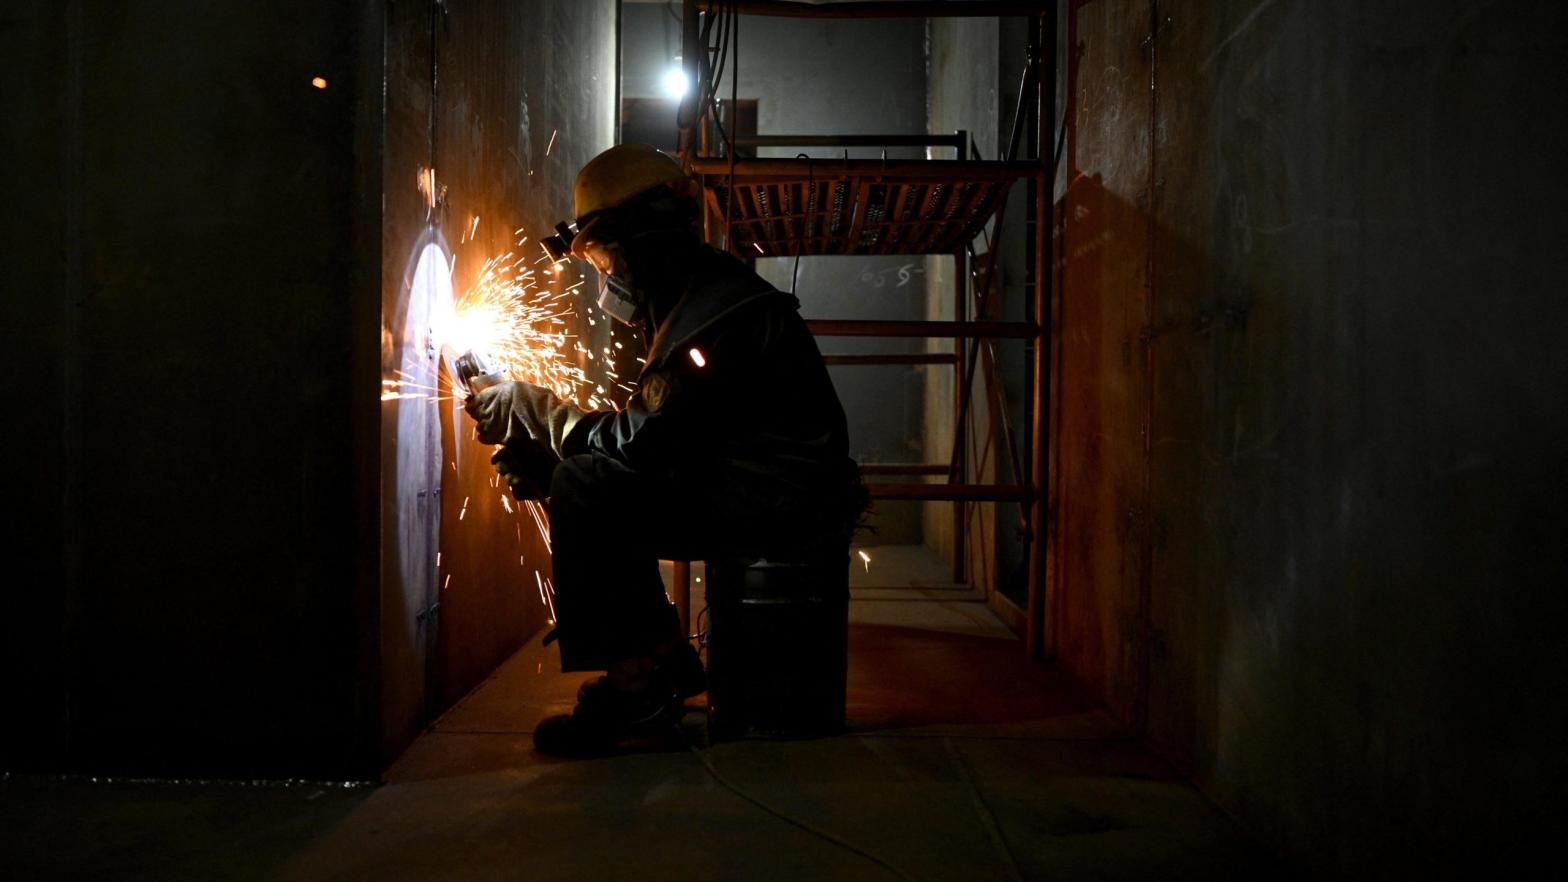 A worker welding metal inside a still-under-construction replica of the Titanic ship in Daying County in China's southwest Sichuan province on April 27, 2021. (Photo: Noel Celis and Qian Ye/AFP, Getty Images)